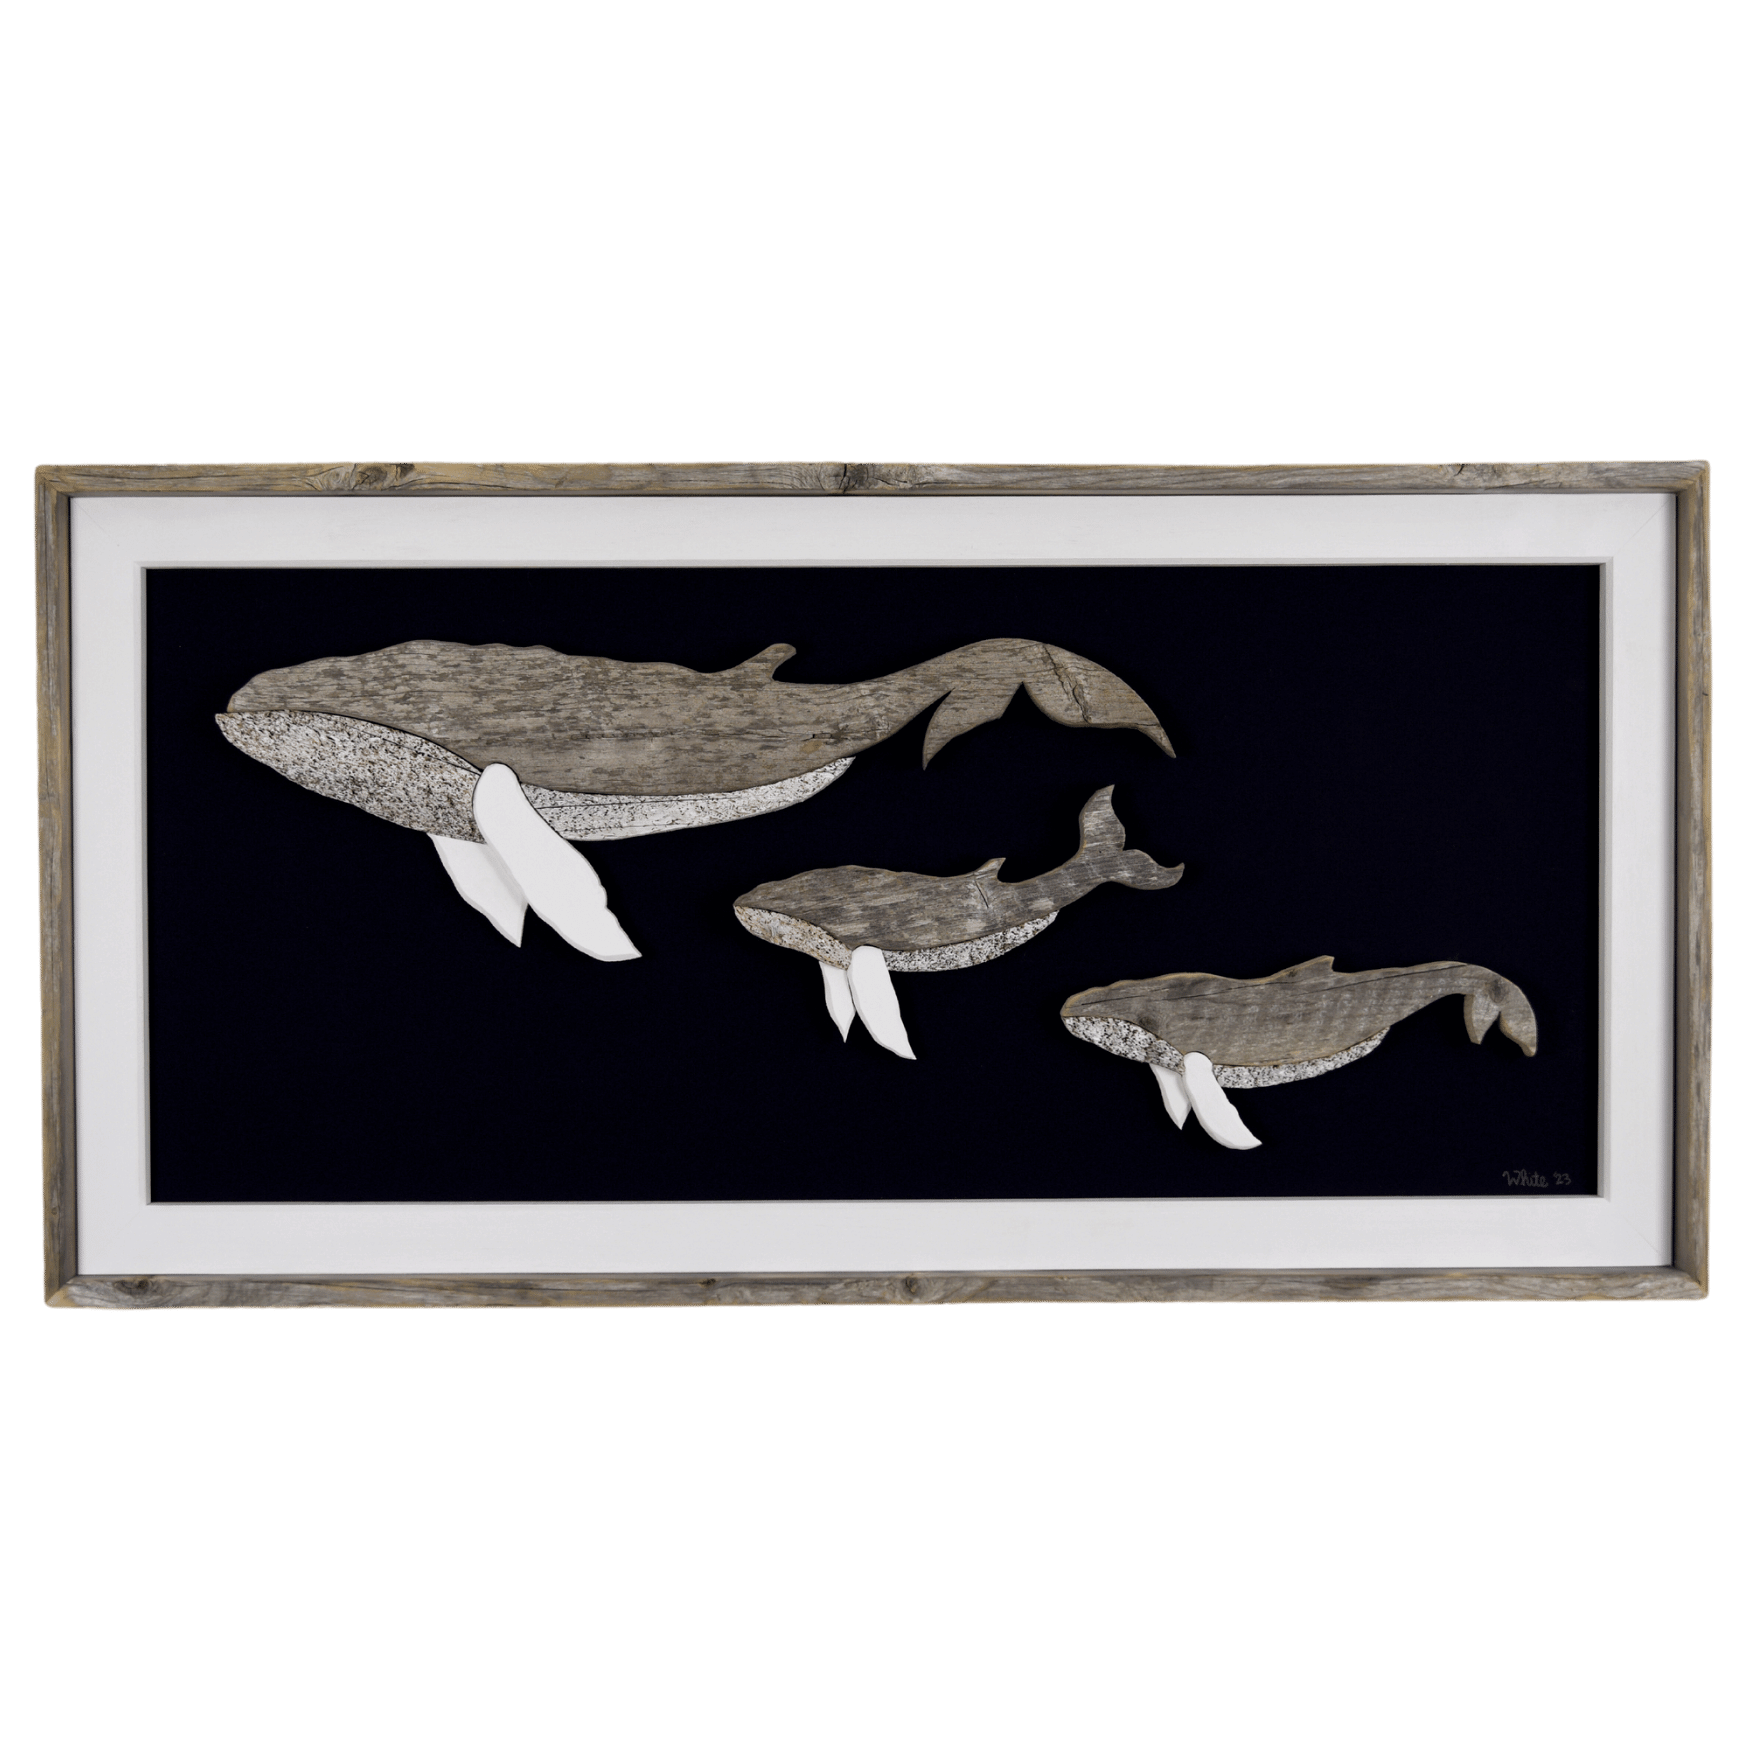 The White's Emporium's driftwood art piece features three humpback whales, a mother and 2 calves, made from reclaimed wood and driftwood sourced in Newfoundland.